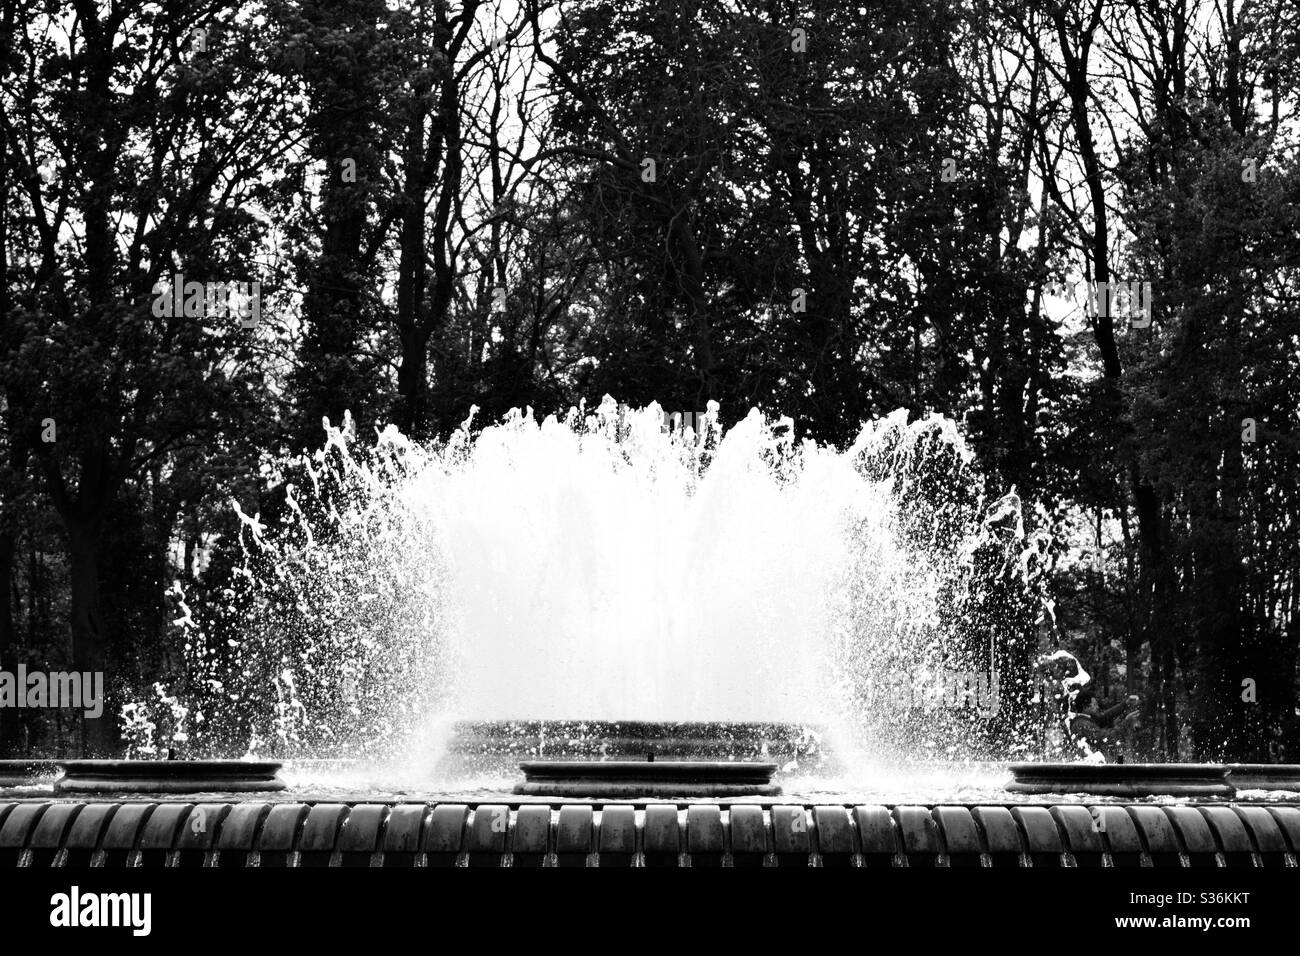 Big water fountain and having trees in the background. Black and white filter. Stock Photo